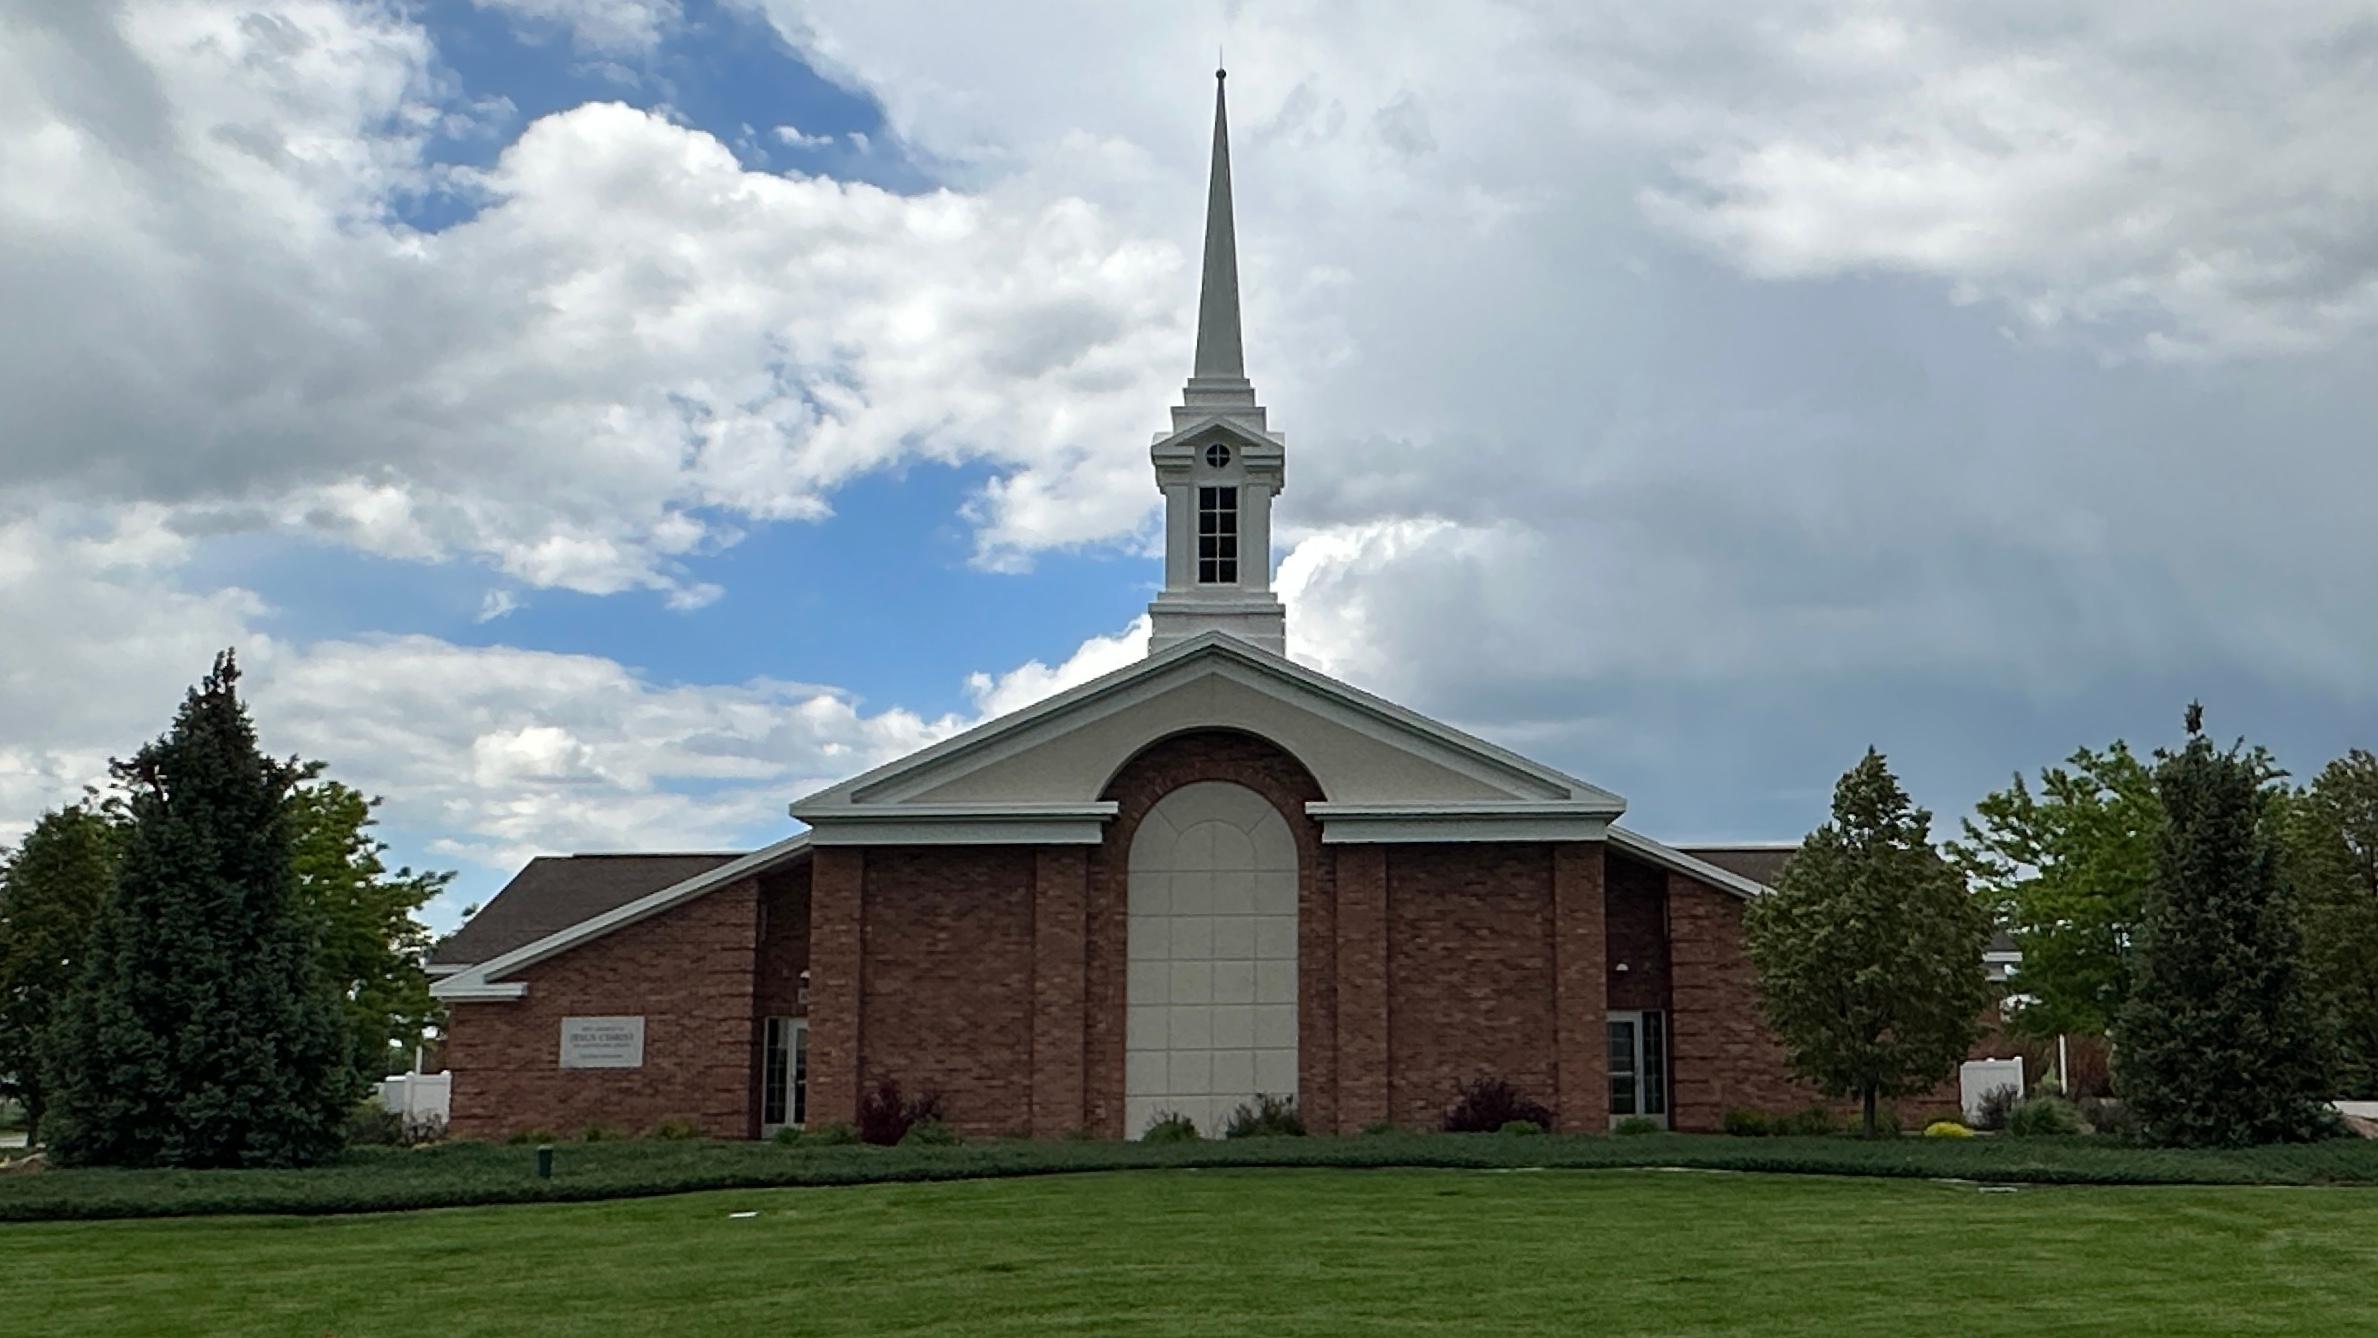 The Niter Building in the Grace Idaho Stake of the Church of Jesus Christ of Latter-day Saints.